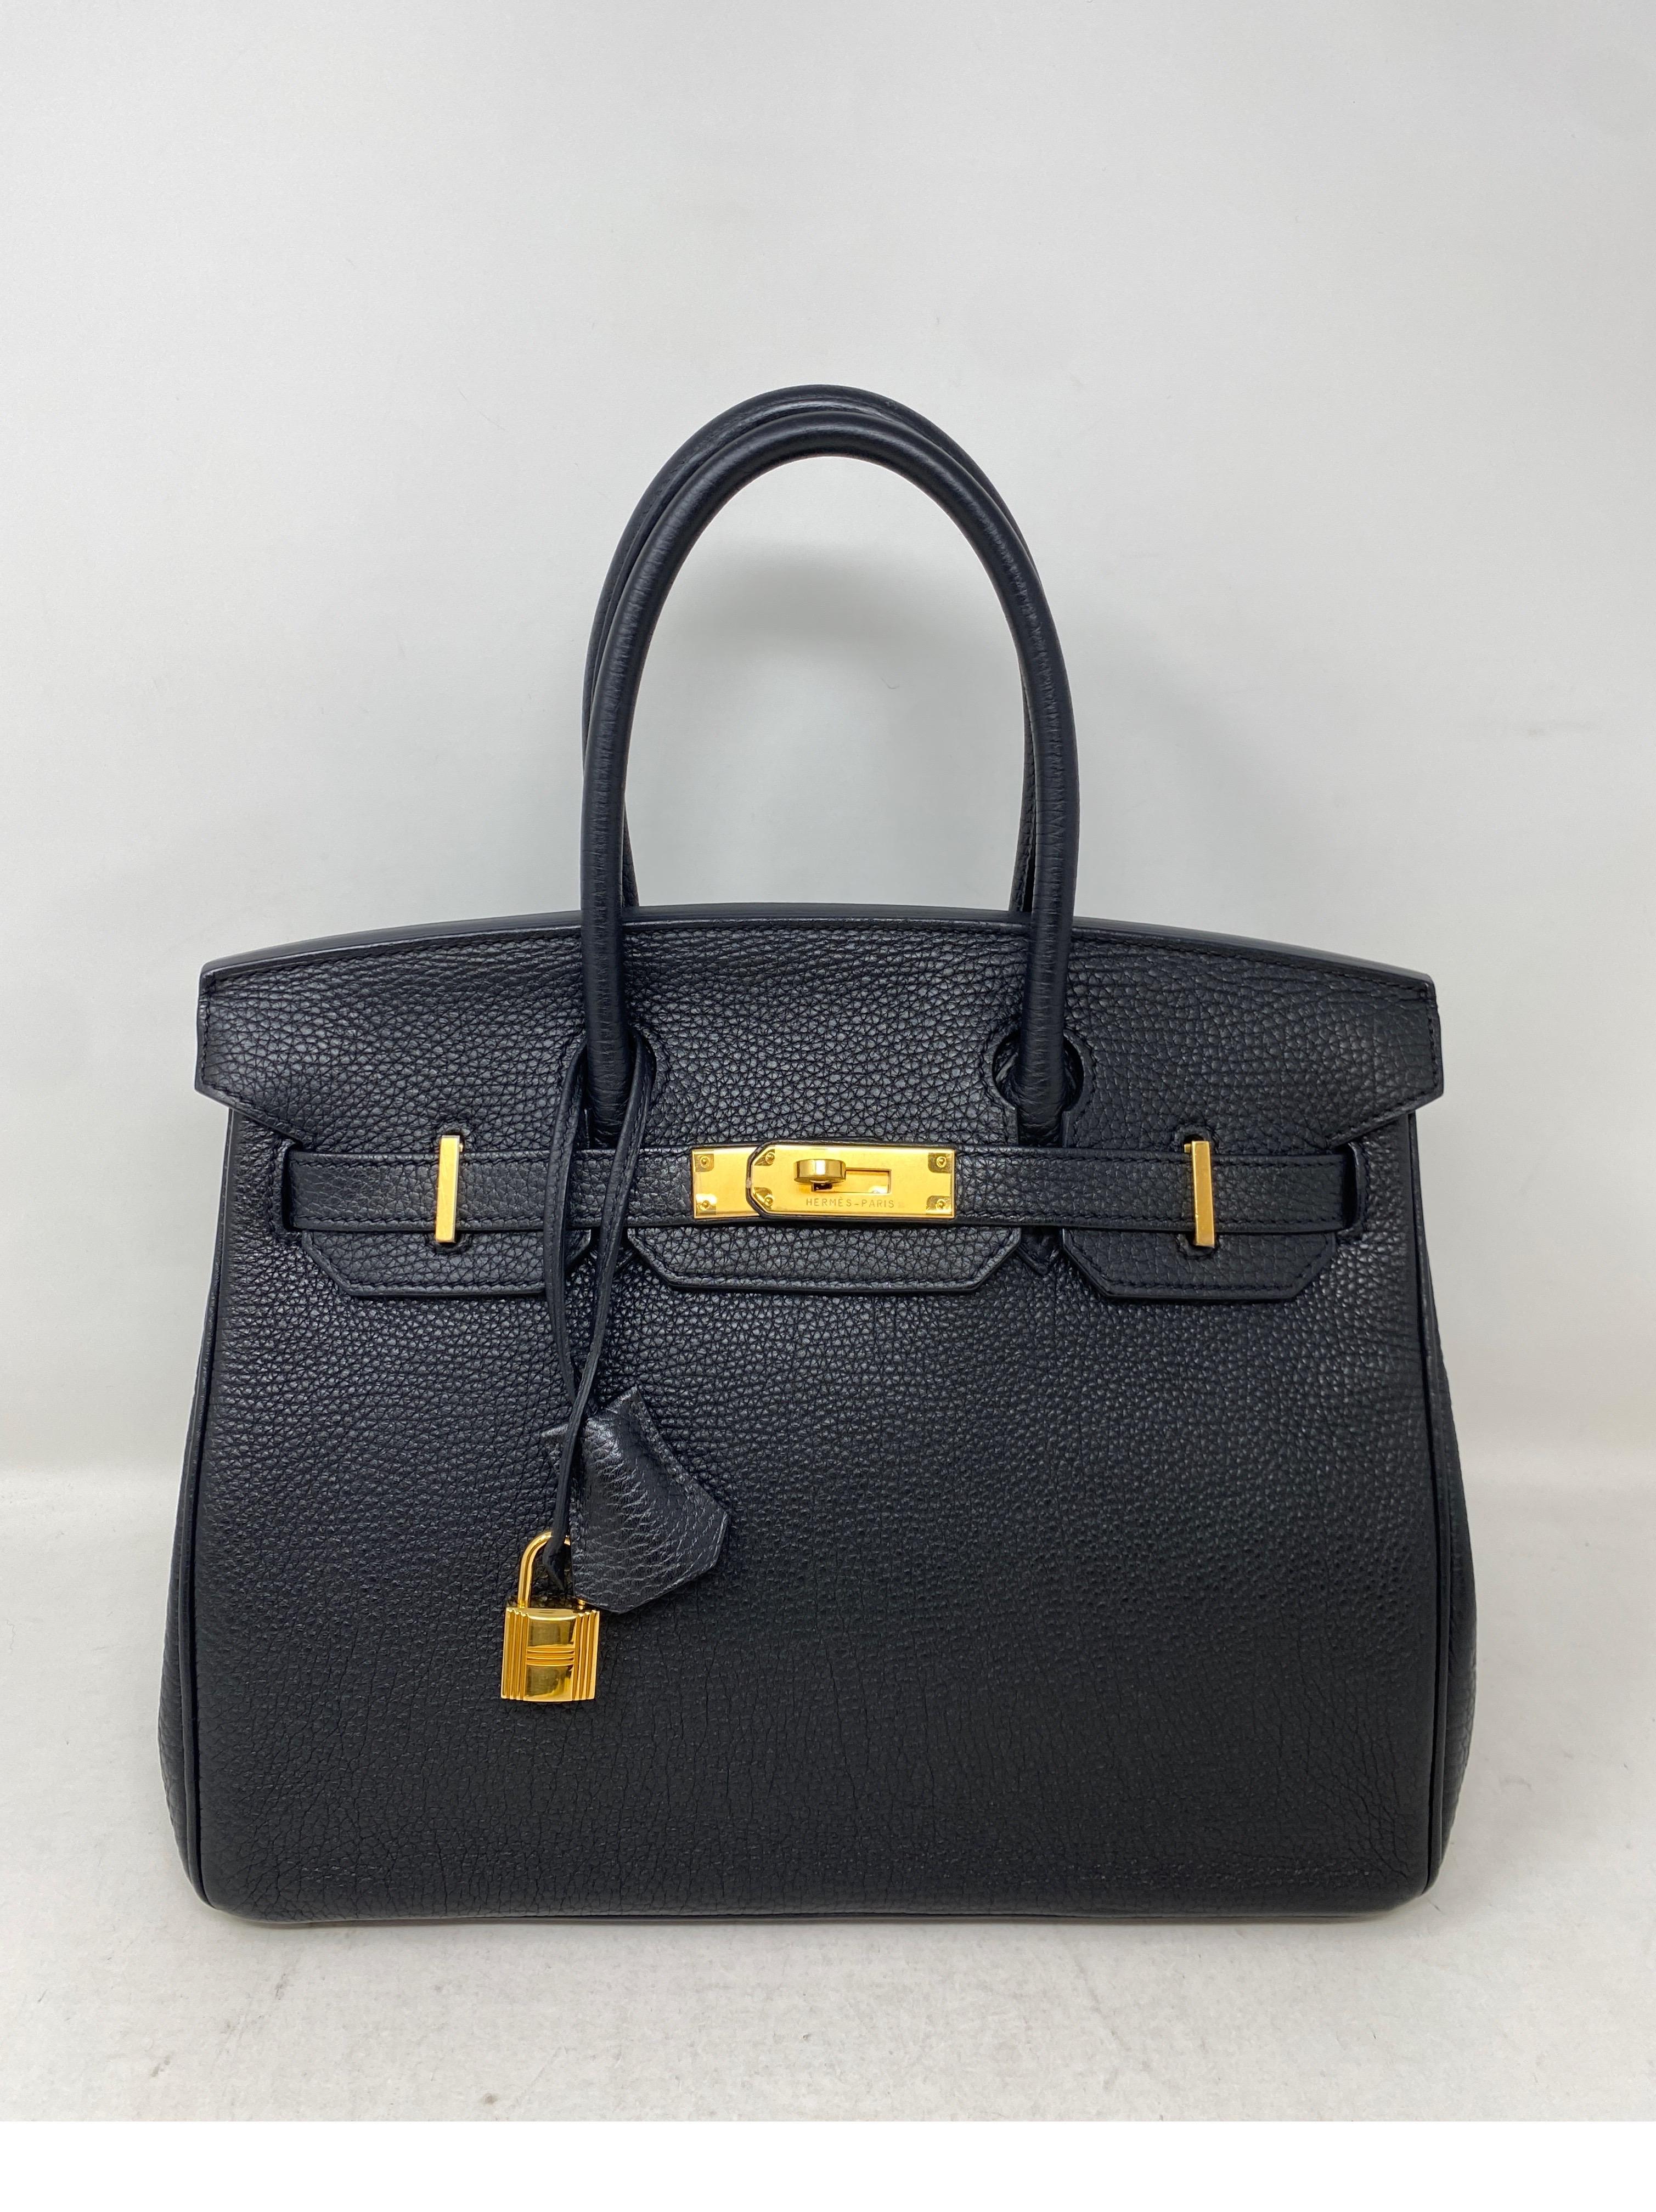 Hermes Black Birkin 30 Bag. Excellent condition. Black togo leather with gold hardware. Classic most wanted size. Interior clean. Great investment bag. Includes clochette, lock, keys, and dust bag. Guaranteed authentic. 